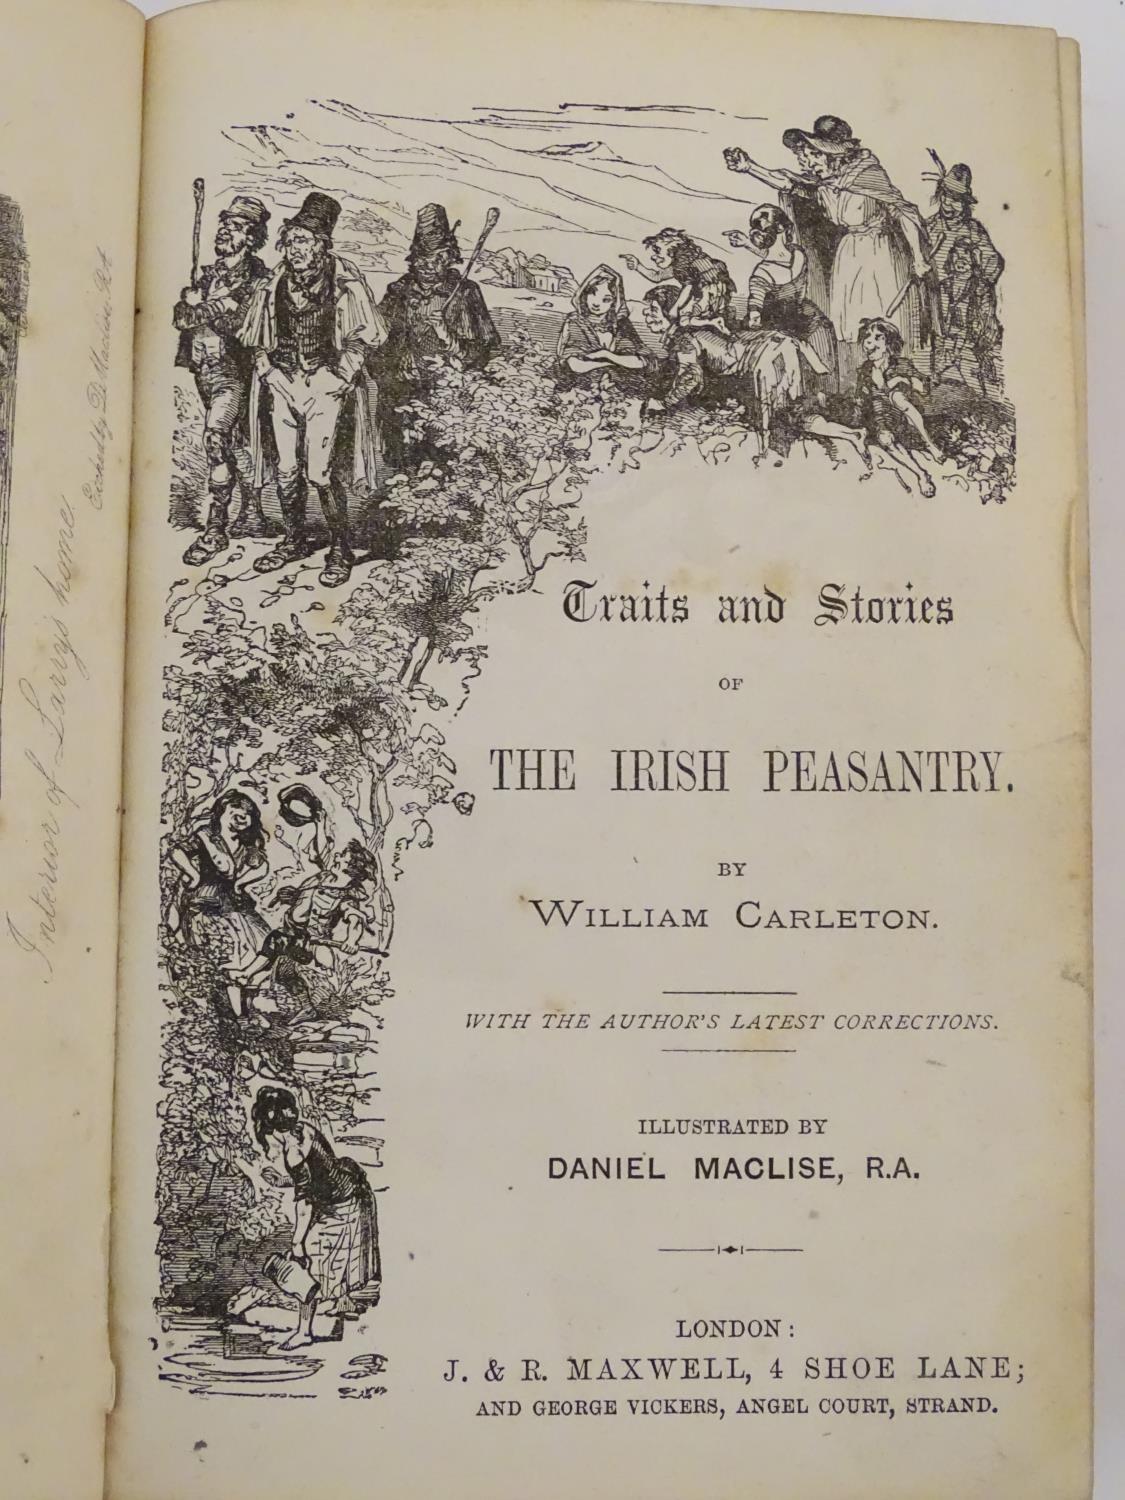 Book: Traits and Stories of the Irish Peasantry, by William Carleton, with illustrations by Daniel - Image 2 of 7